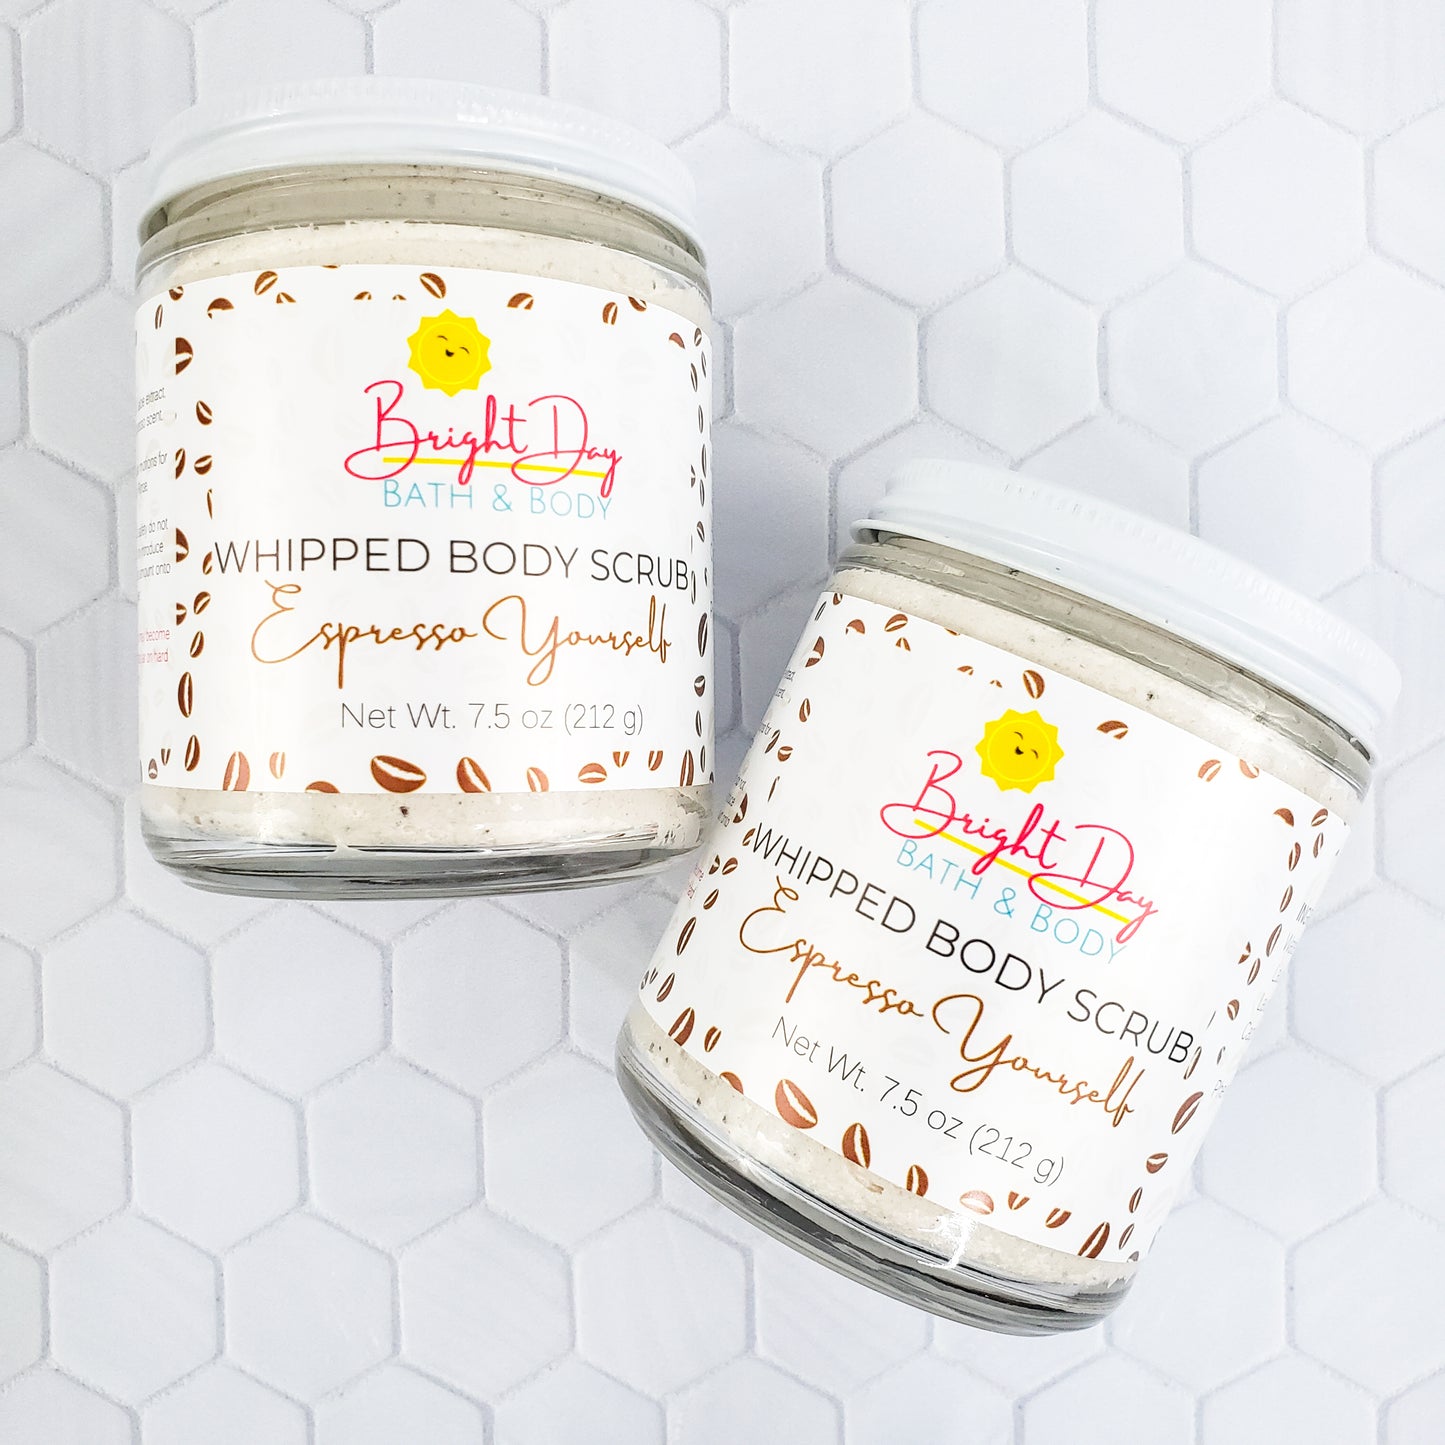 Two Espresso Yourself Body Scrubs on a tile background